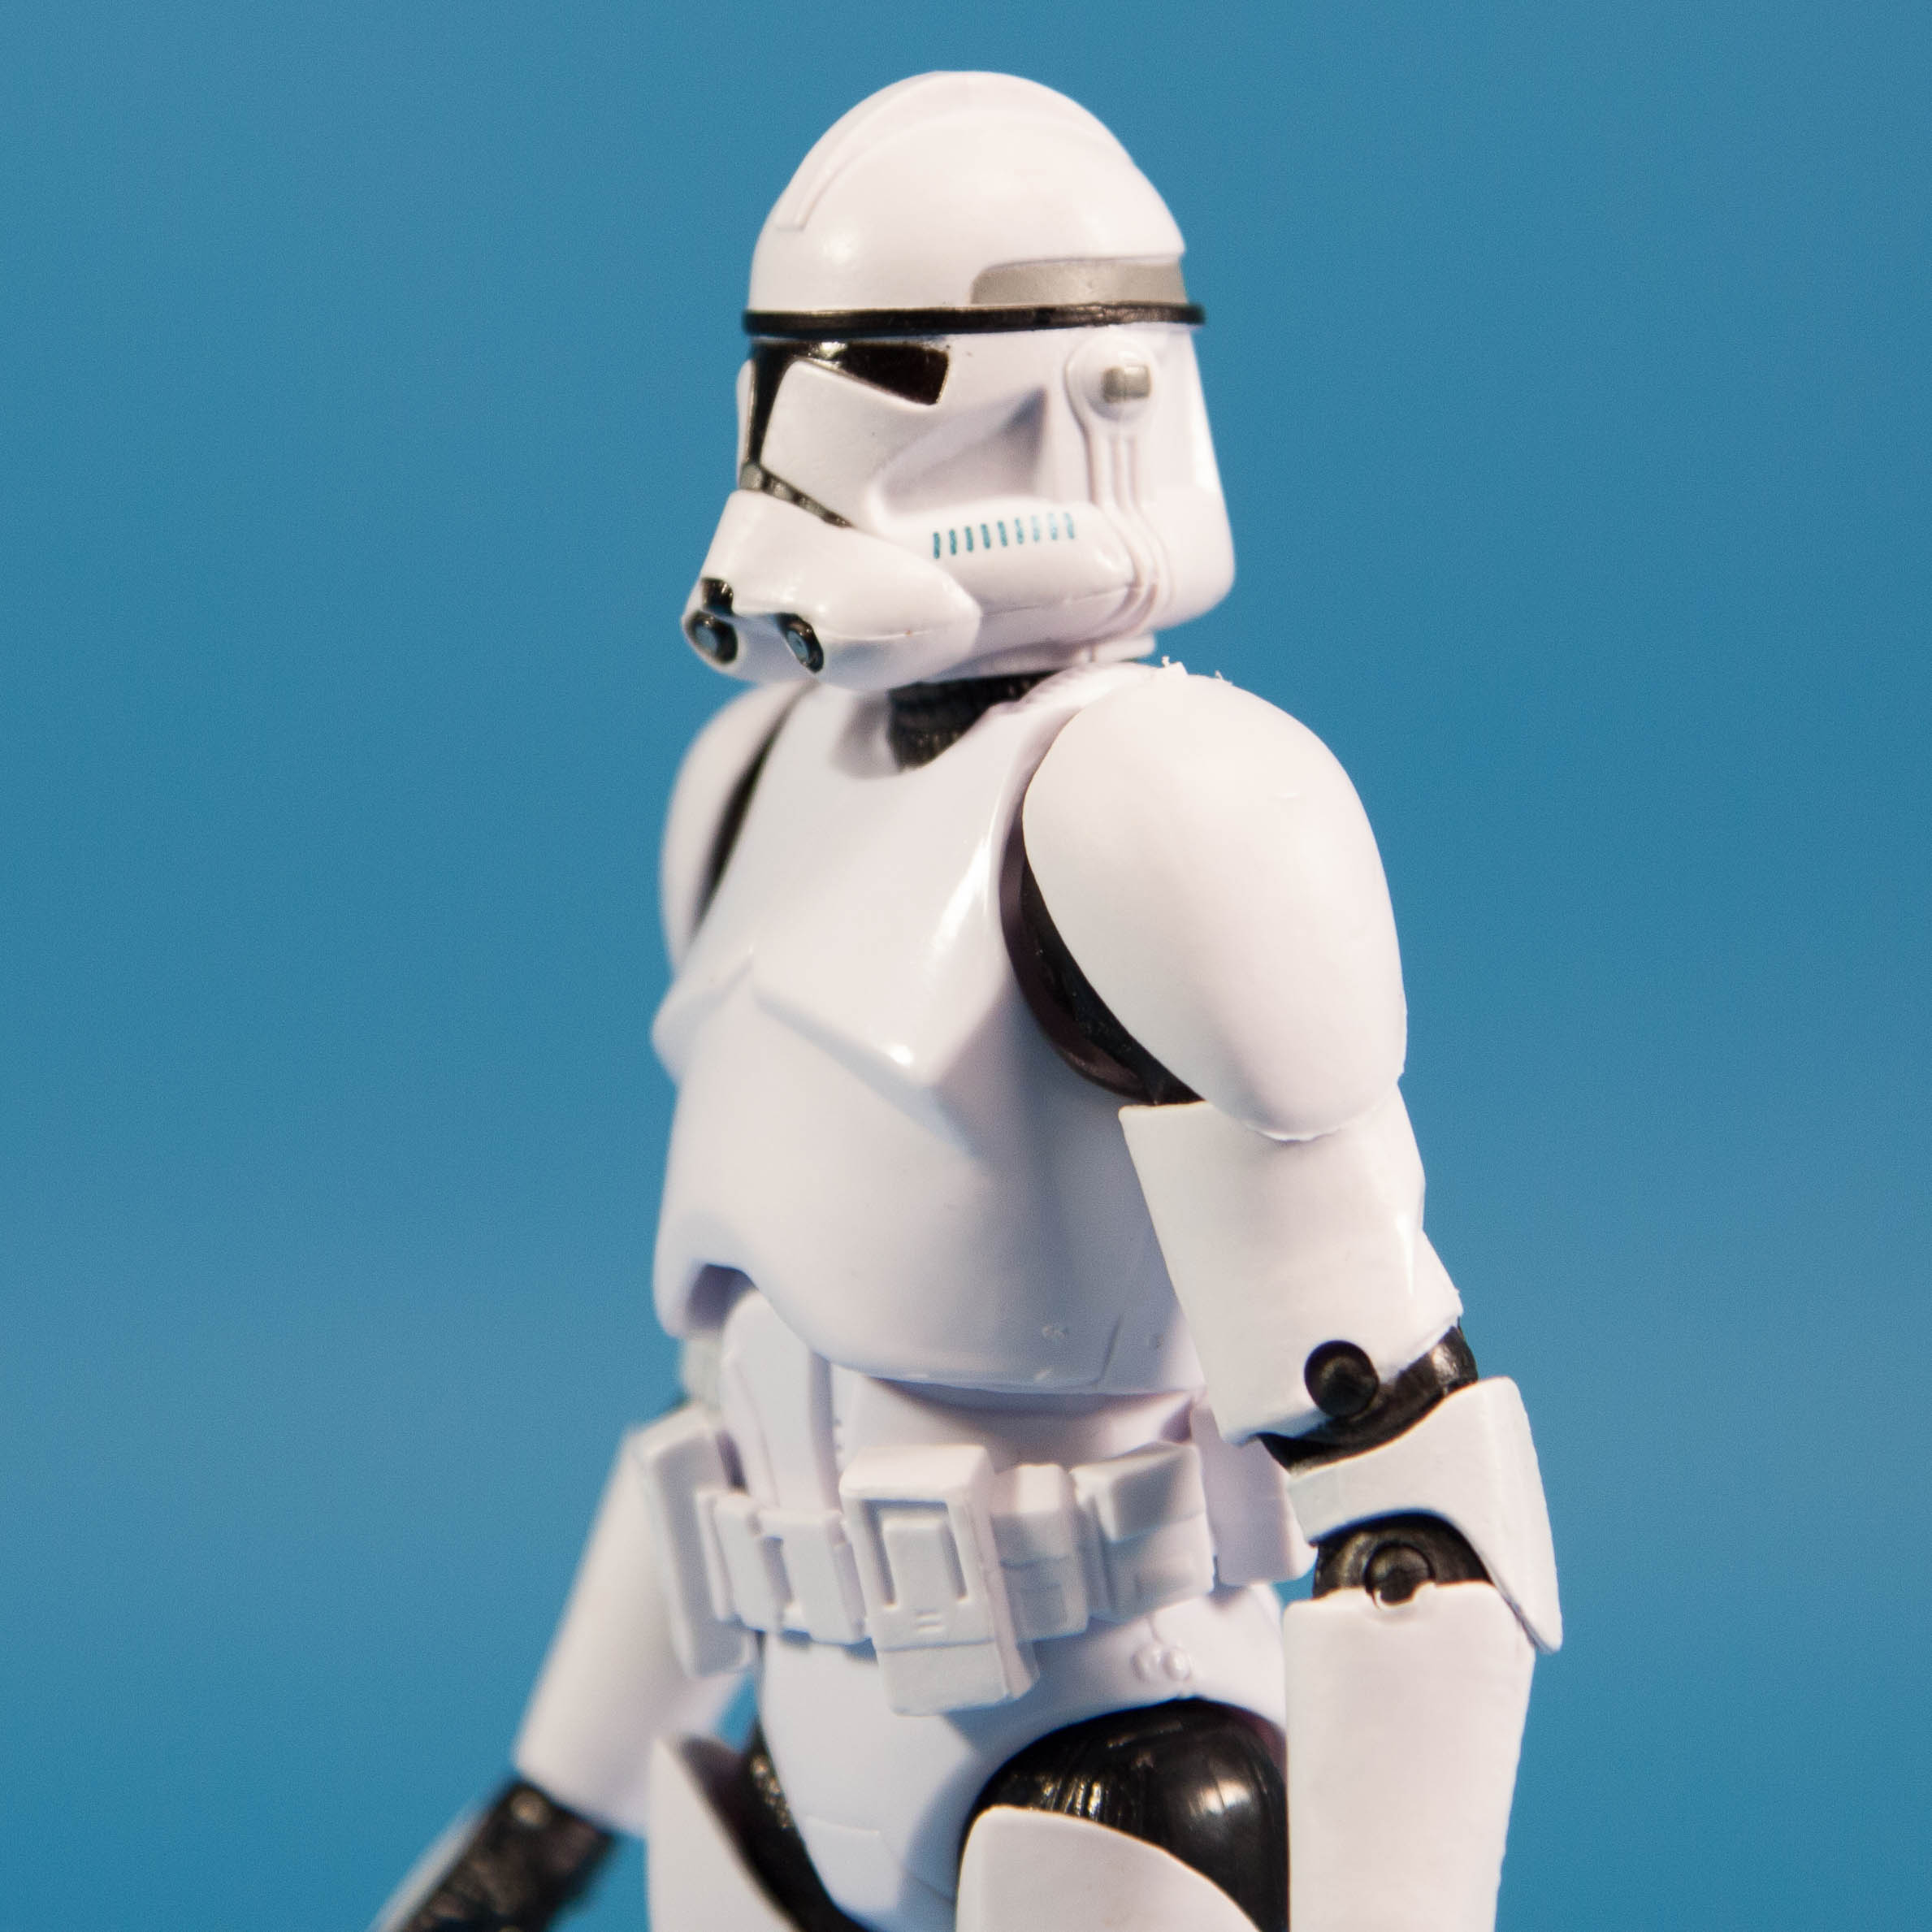 stormtrooper-collection-6-inch-4-pack-amazon-exclusive-018.jpg